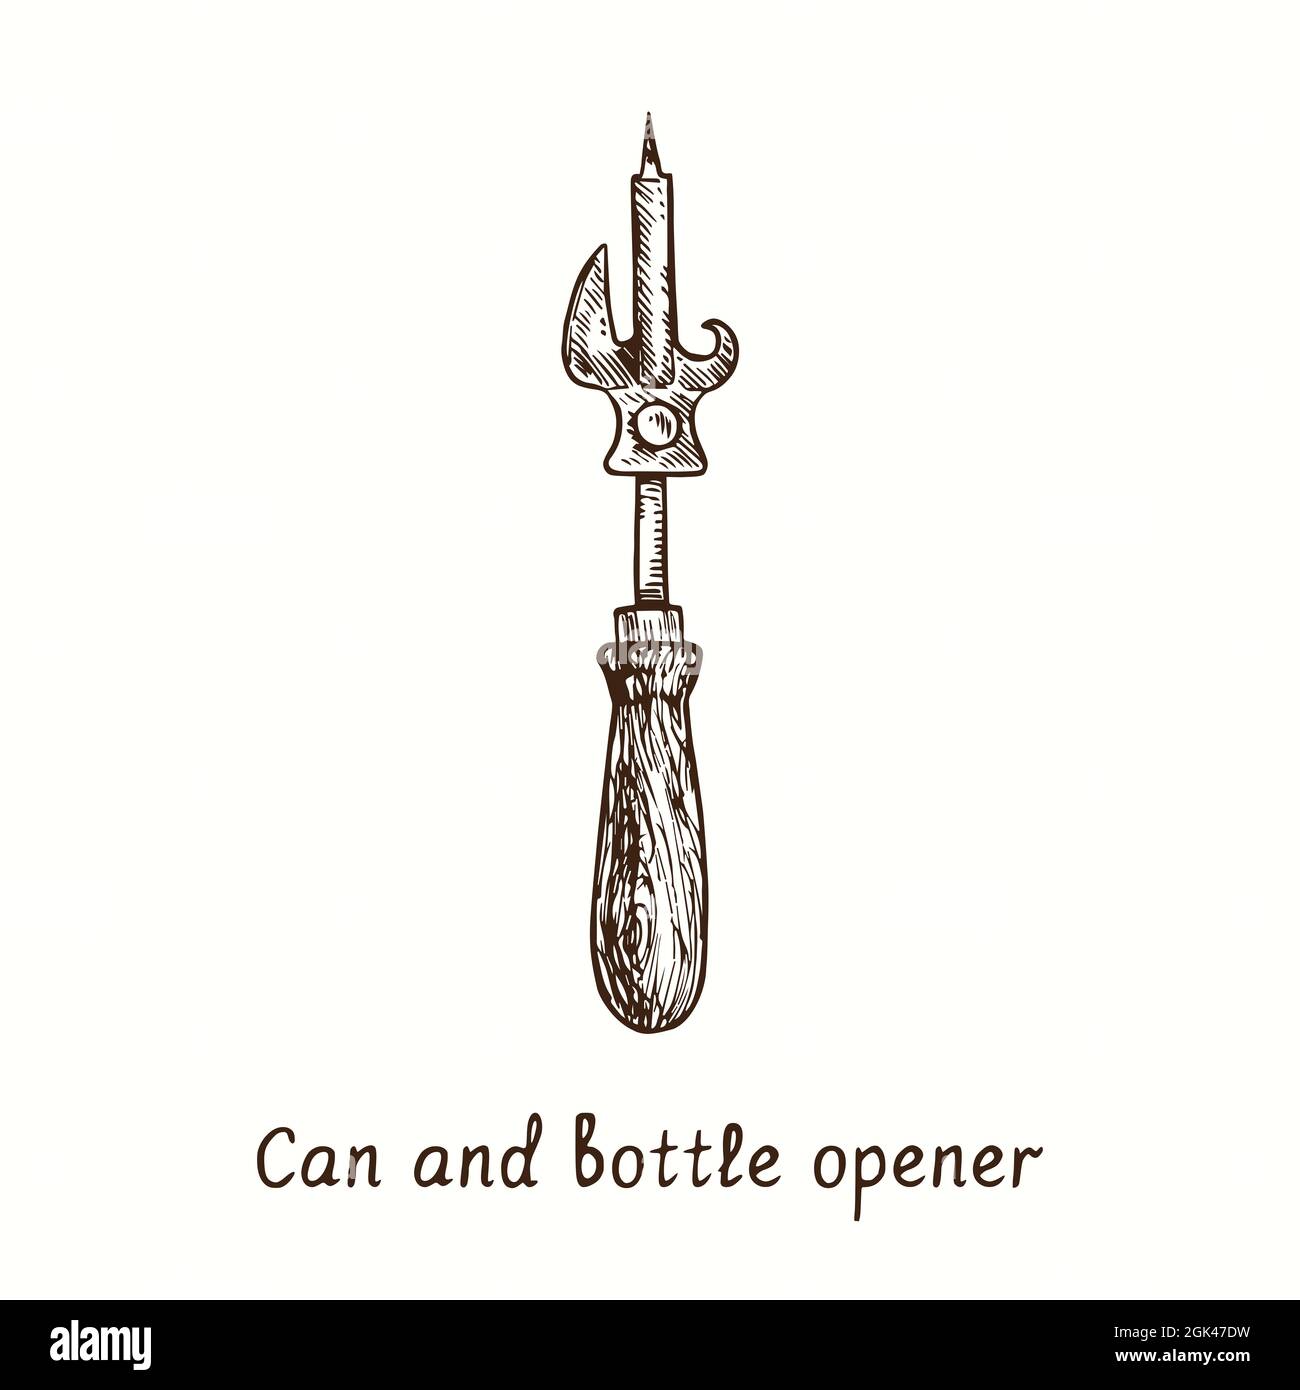 Can and bottle opener. Ink black and white doodle drawing in woodcut style. Stock Photo